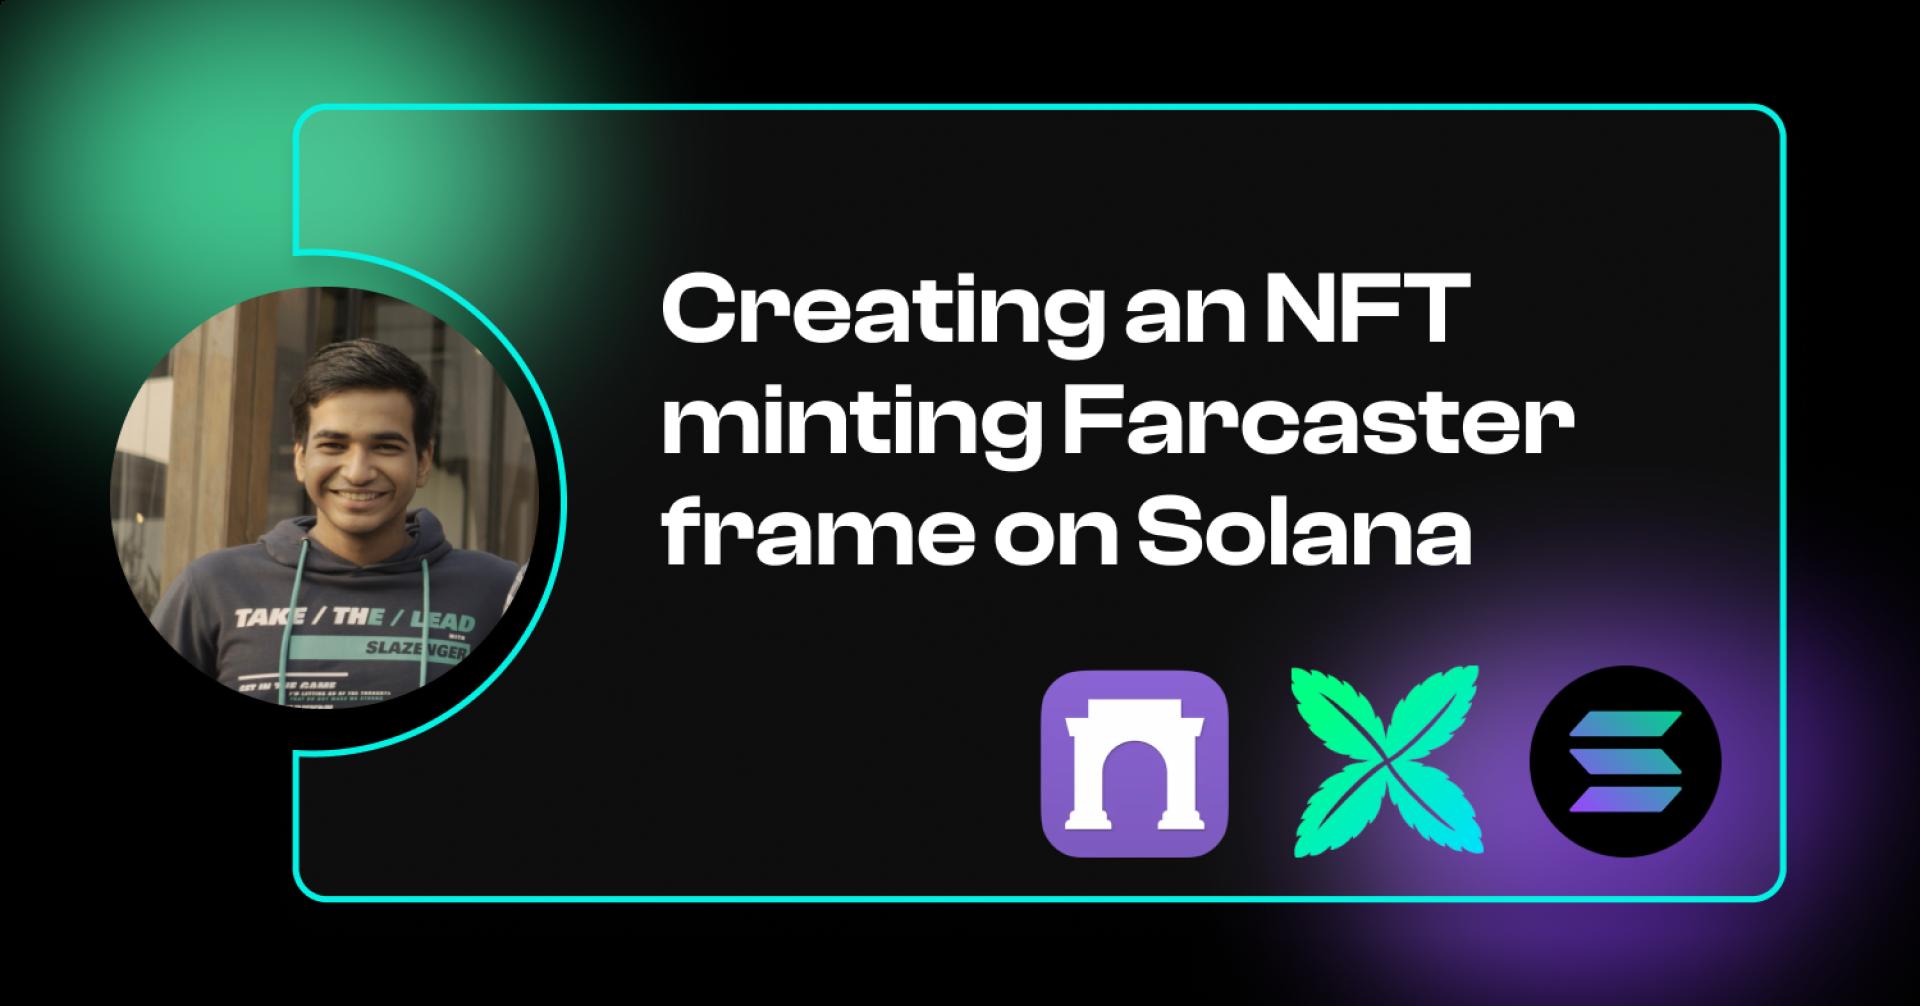 Creating an NFT minting Farcaster frame on Solana